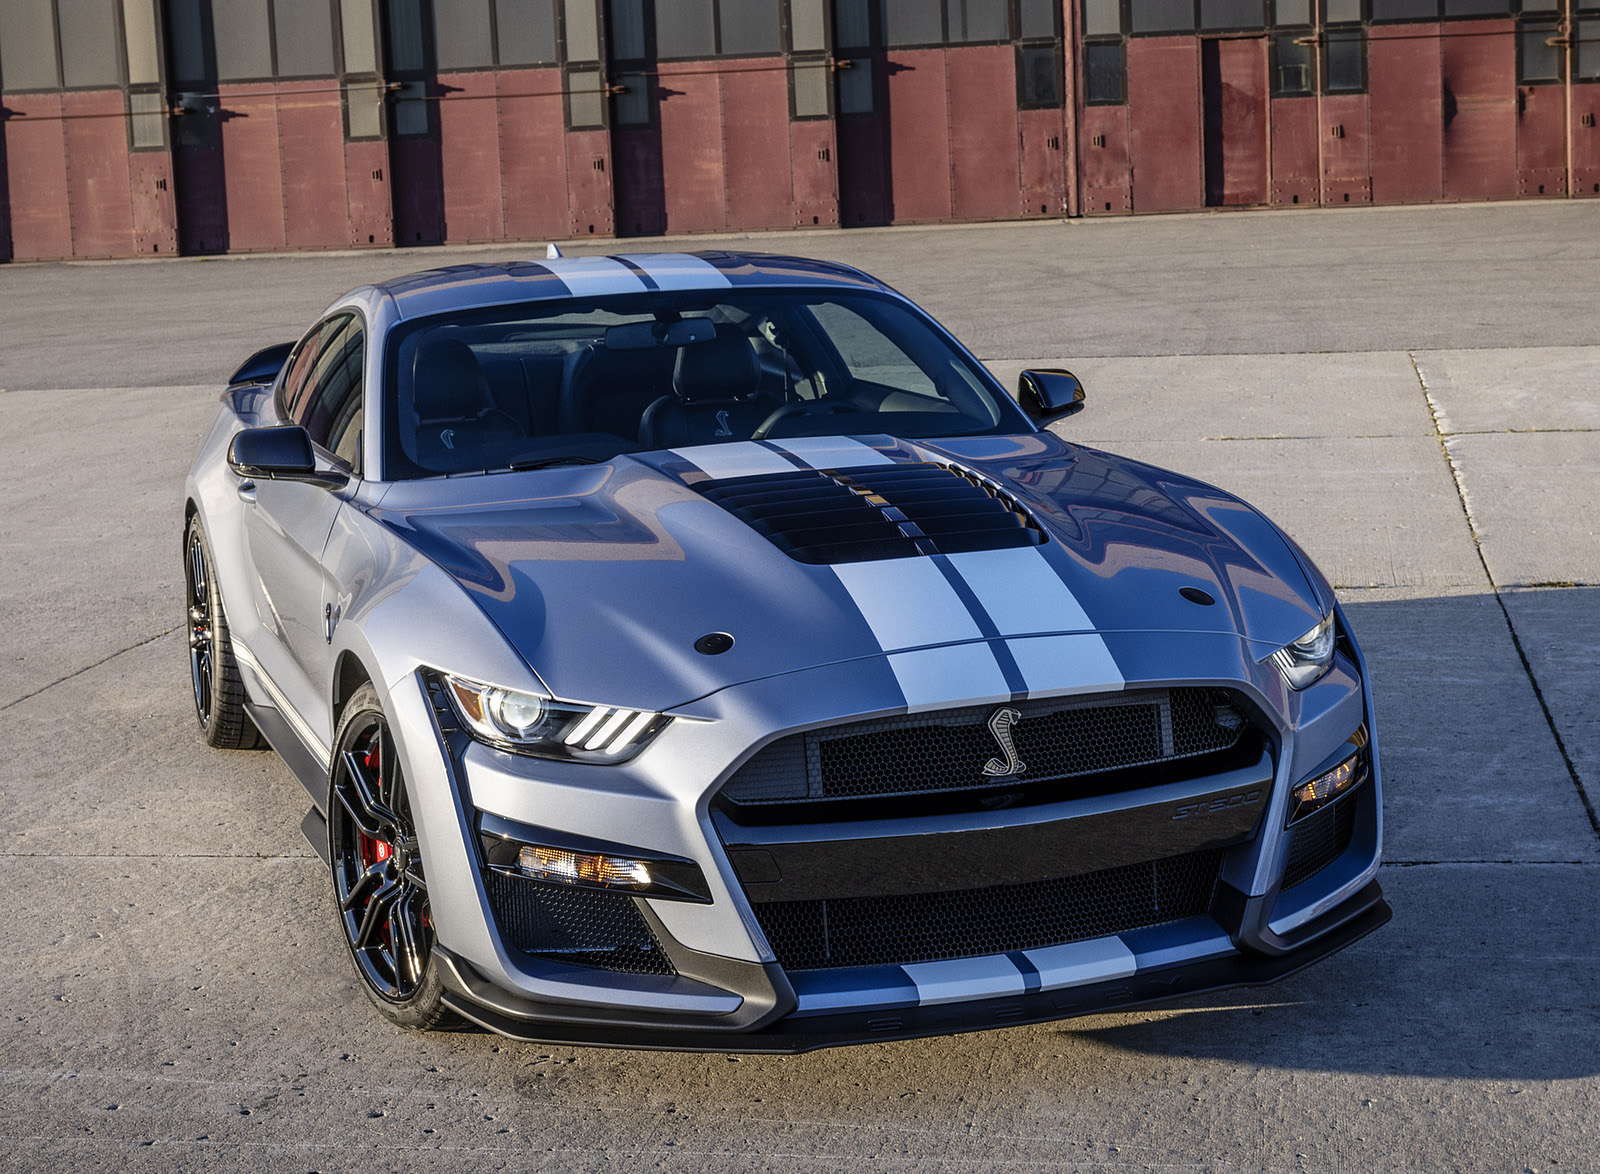 2022 Ford Mustang Shelby GT500 Heritage Edition Wallpaper (HD Image)